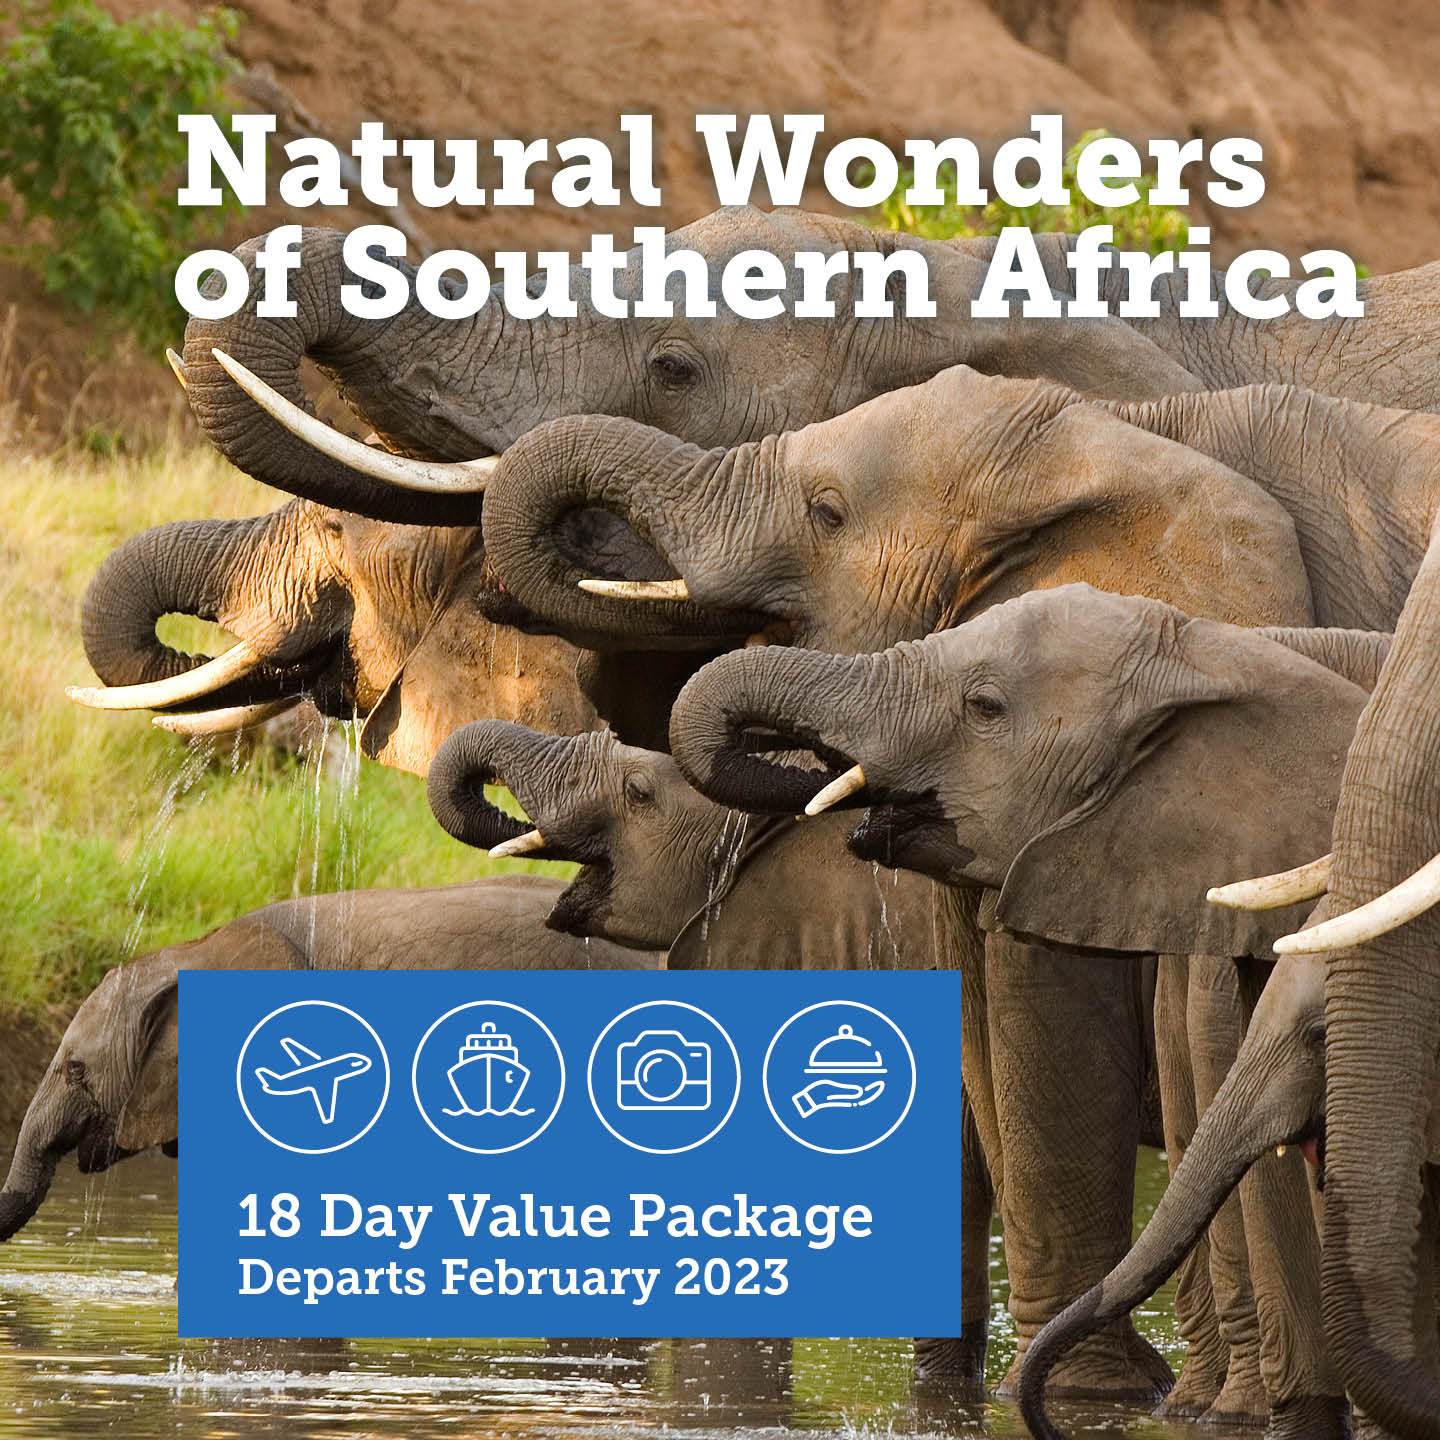 Natural Wonders of Southern Africa Cruise & Tour